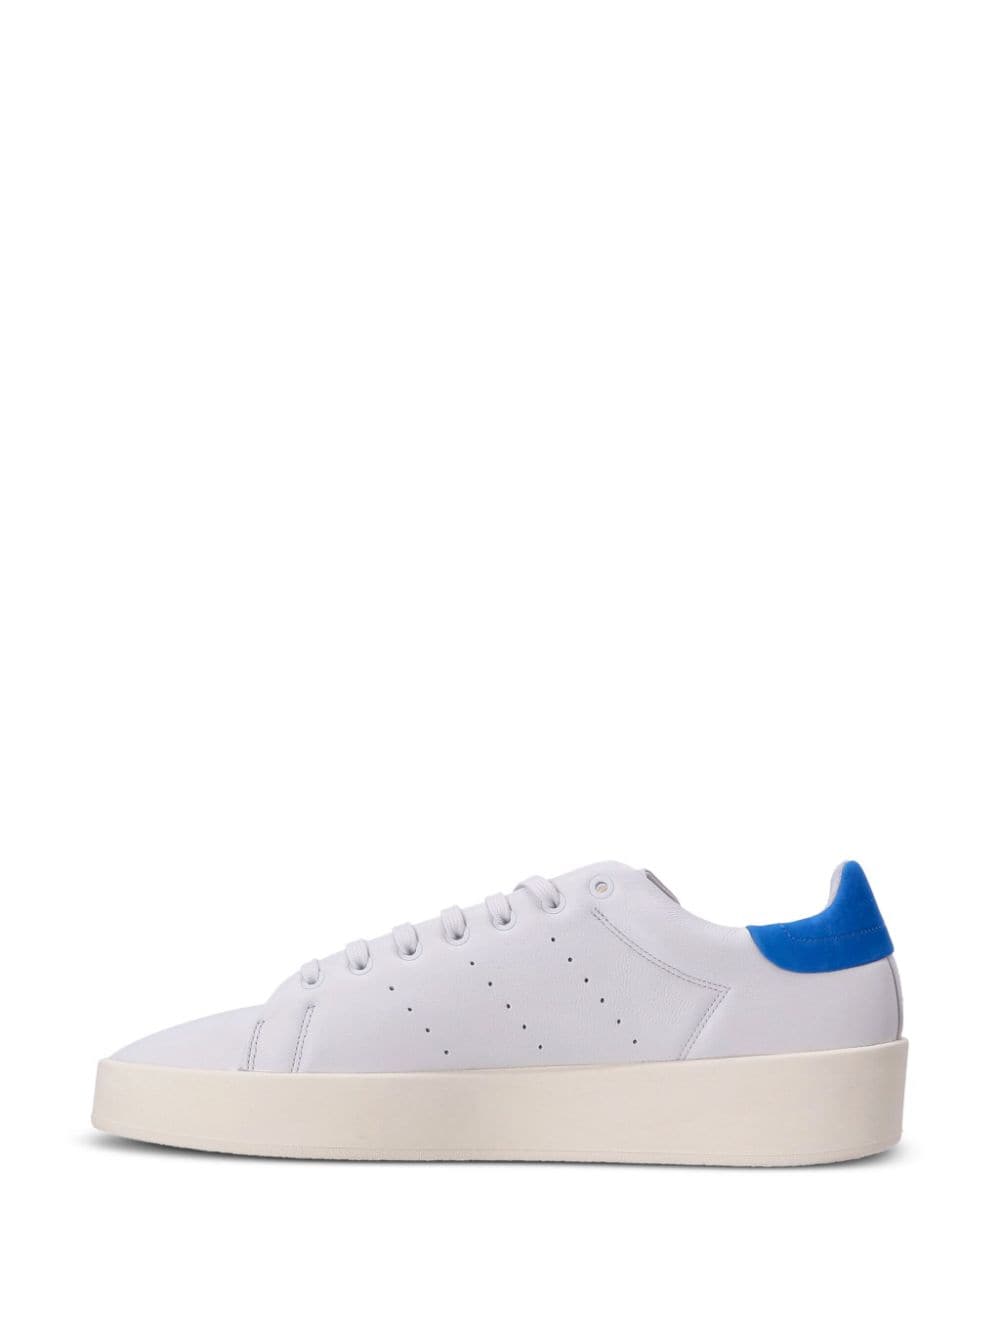 Shop Adidas Originals Stan Smith Relasted Leather Sneakers In White